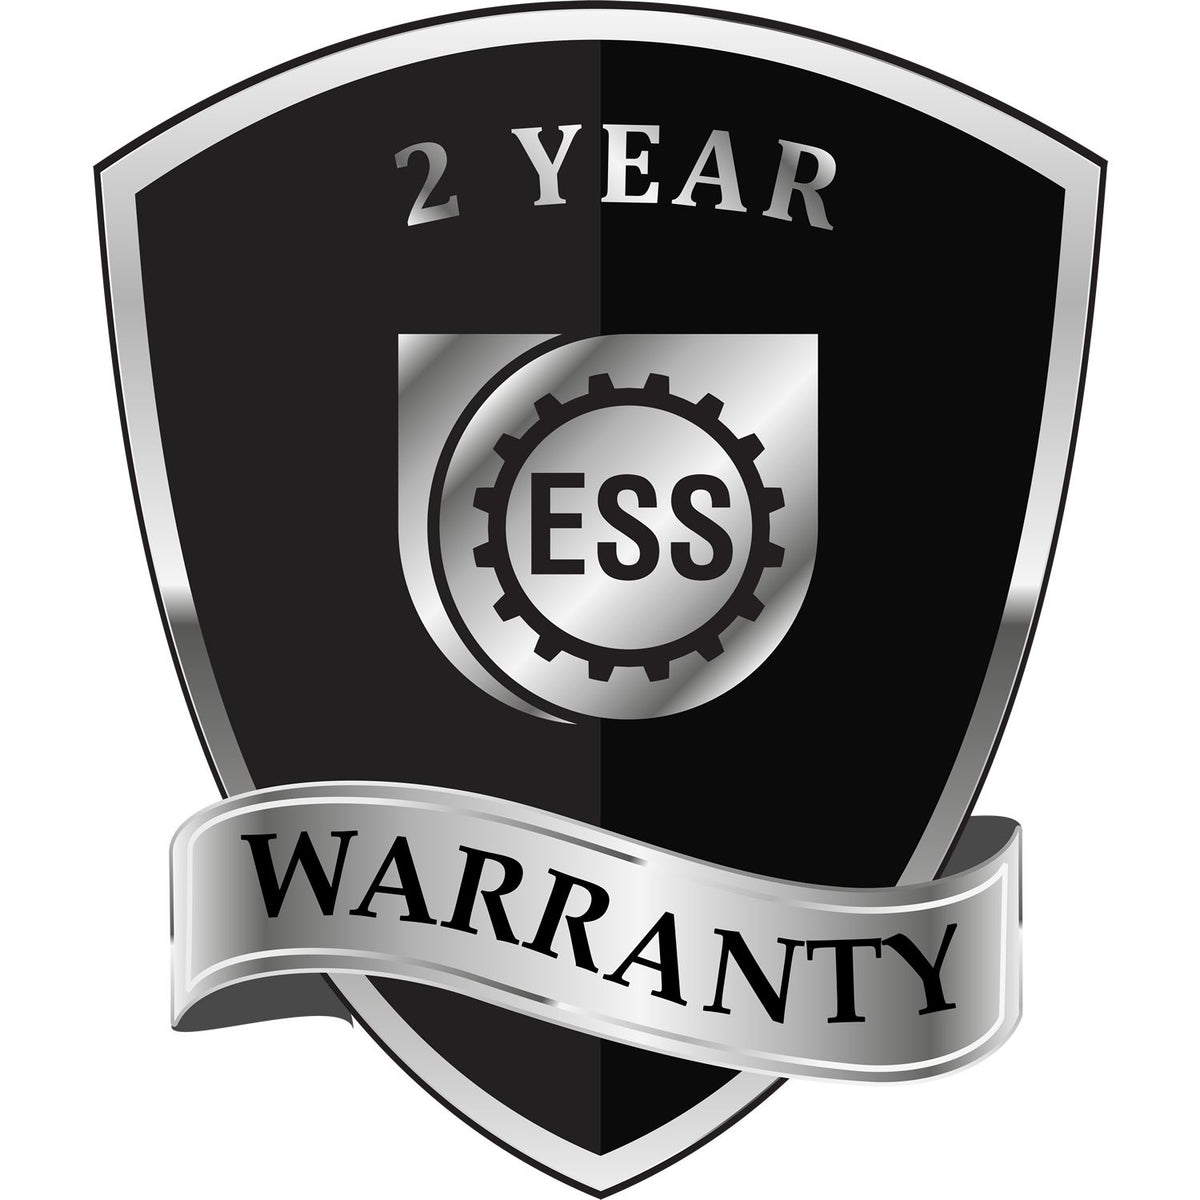 A badge or emblem showing a warranty icon for the State of Colorado Long Reach Architectural Embossing Seal